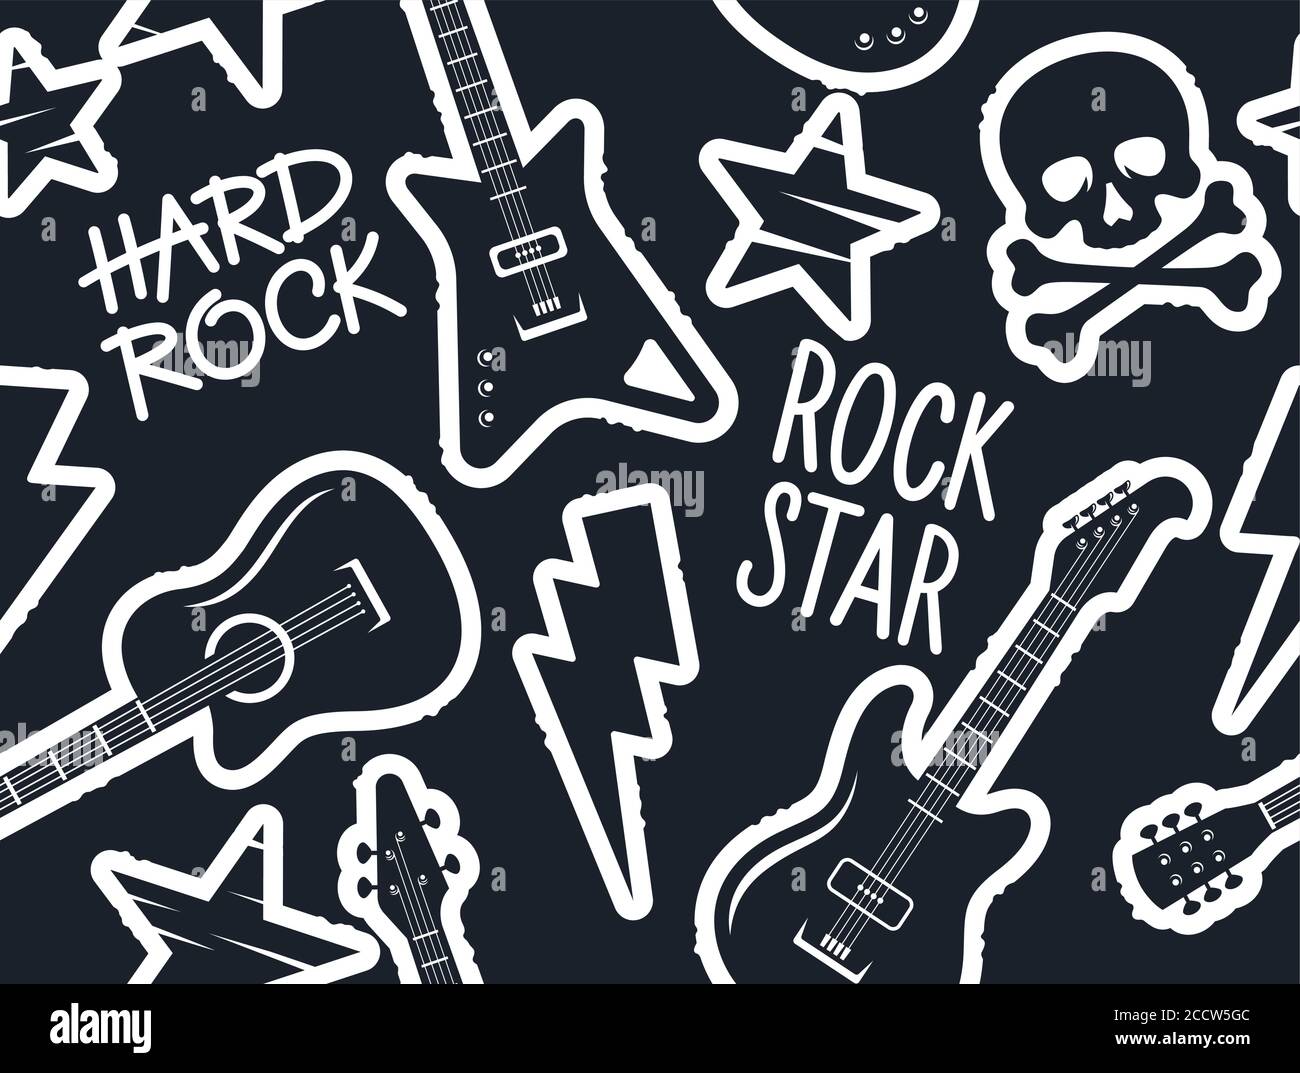 Trendy musical seamless pattern with guitars, skull and crossbones and other rock music symbols for teenage clothes design. Seamless rock music backgr Stock Vector